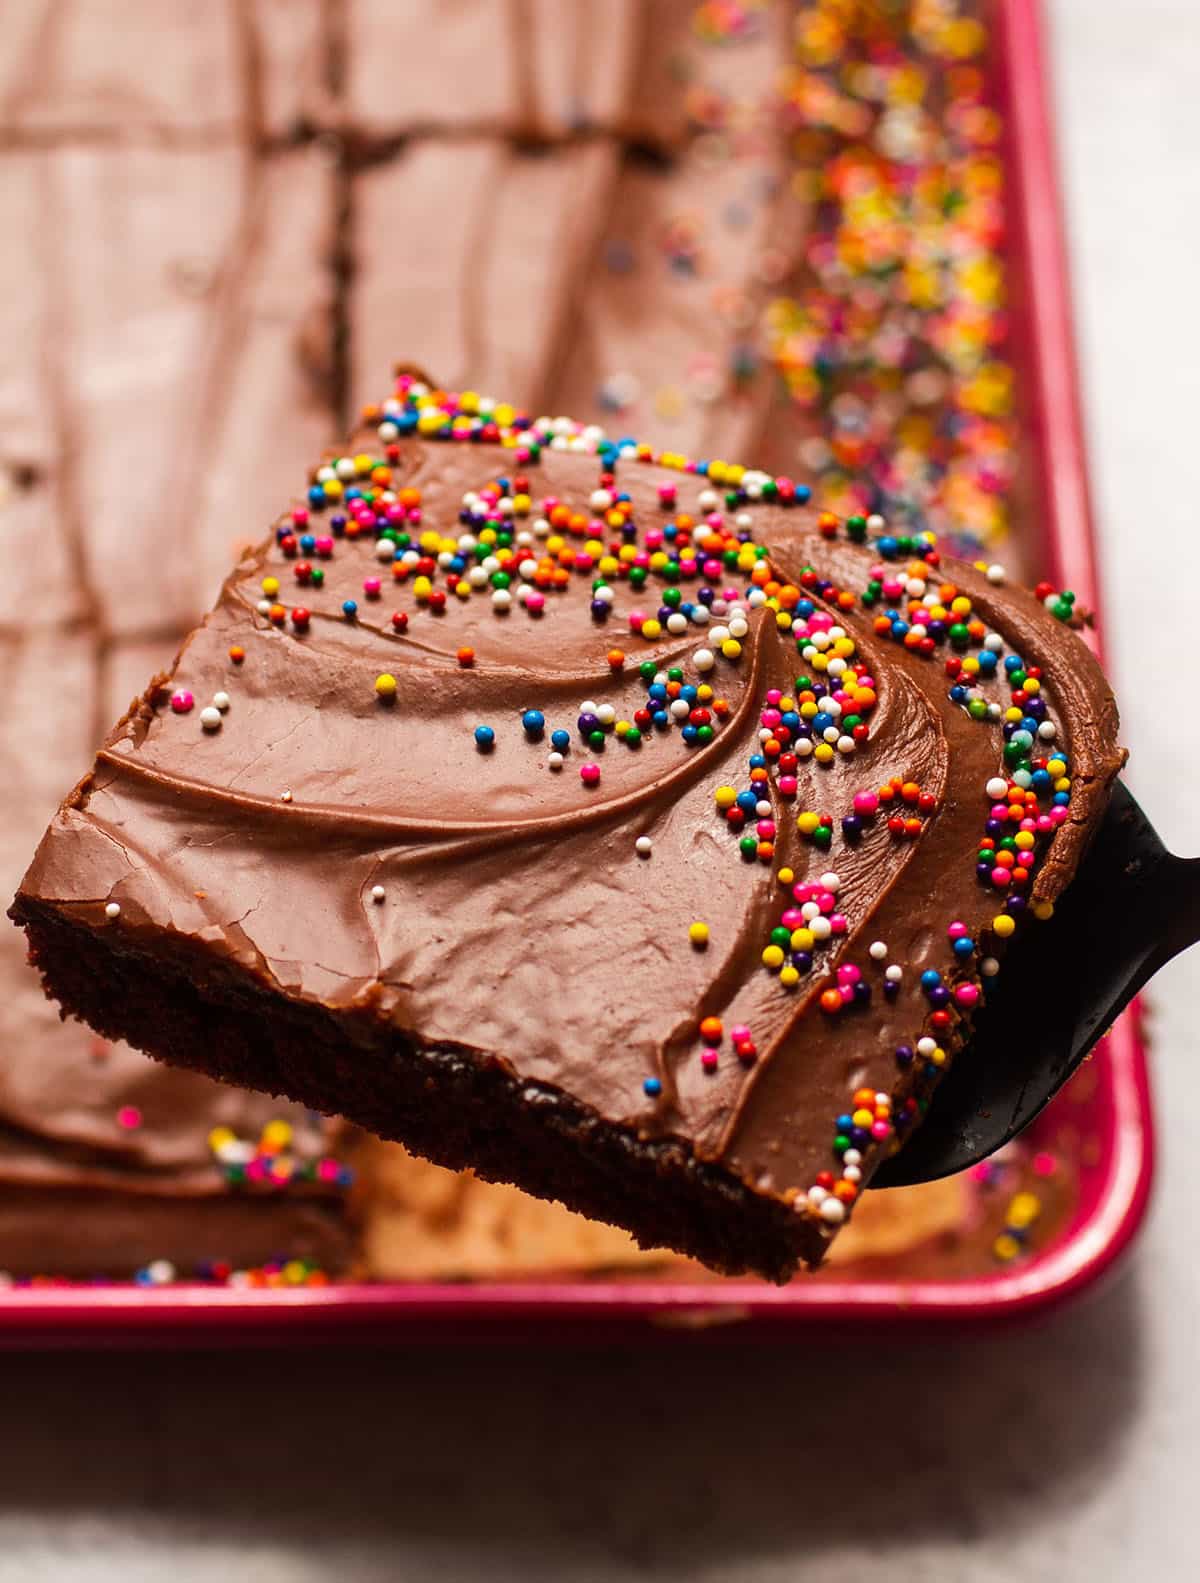 Chocolate sheet cake with fudge frosting and sprinkles.